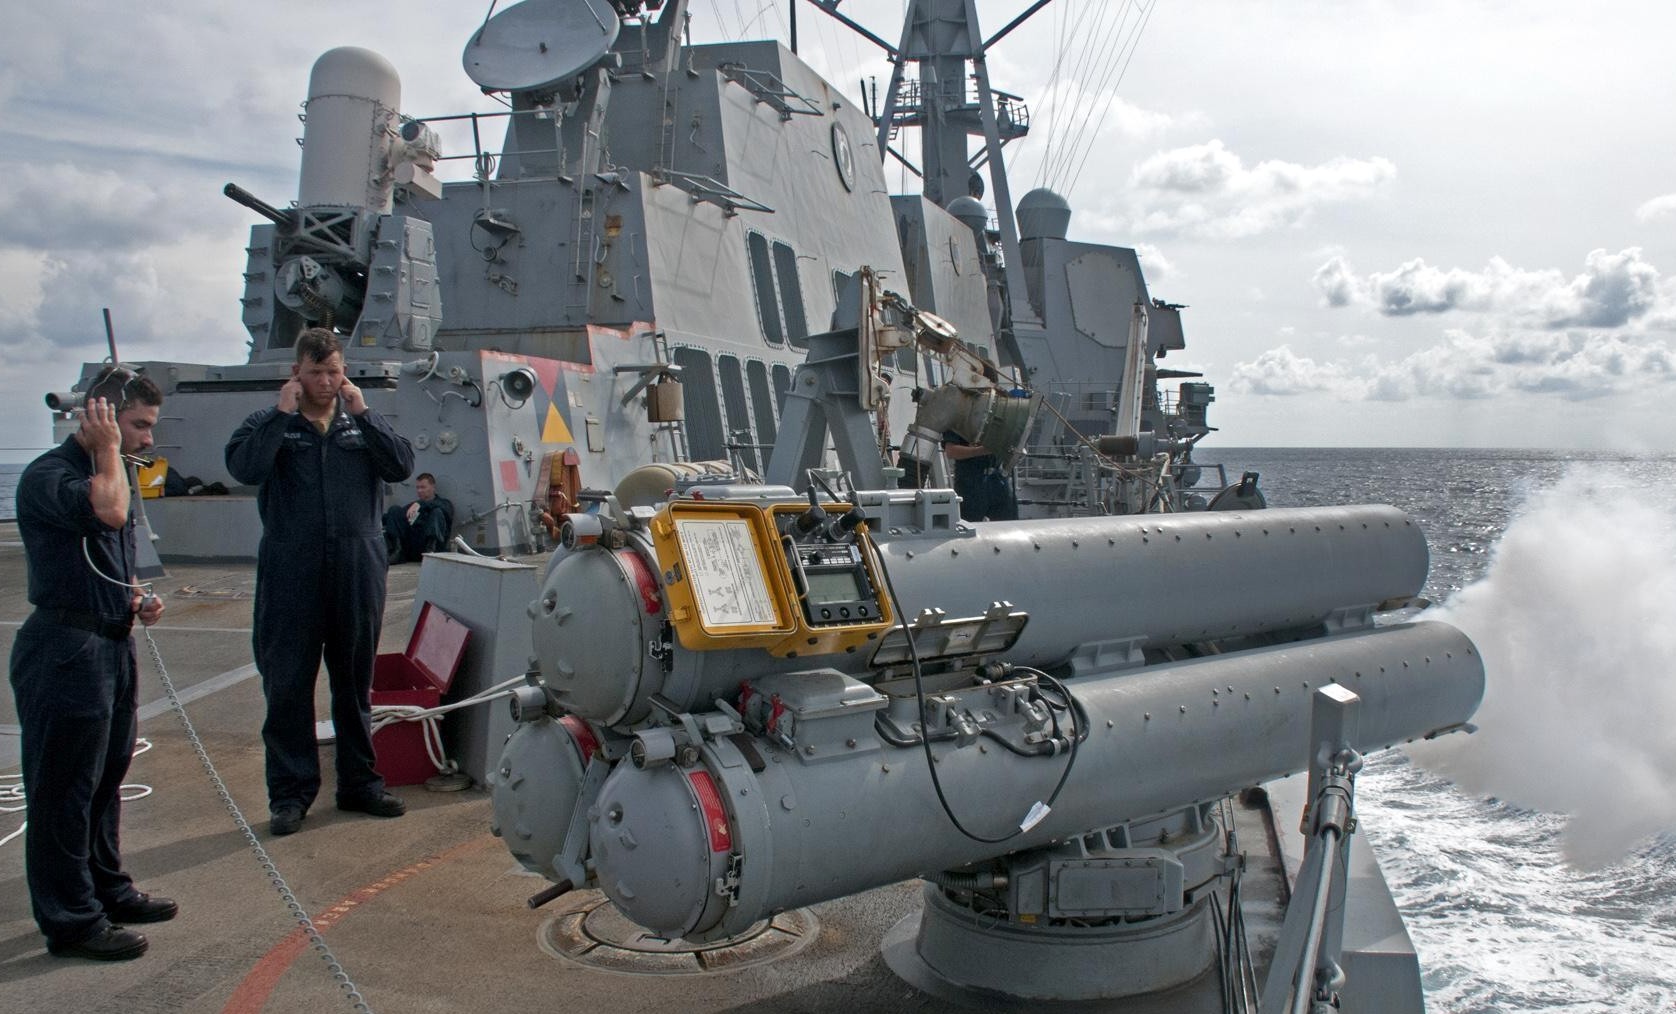 ddg-110 uss william p. lawrence arleigh burke class guided missile destroyer aegis us navy mk.32 torpedo tubes 47